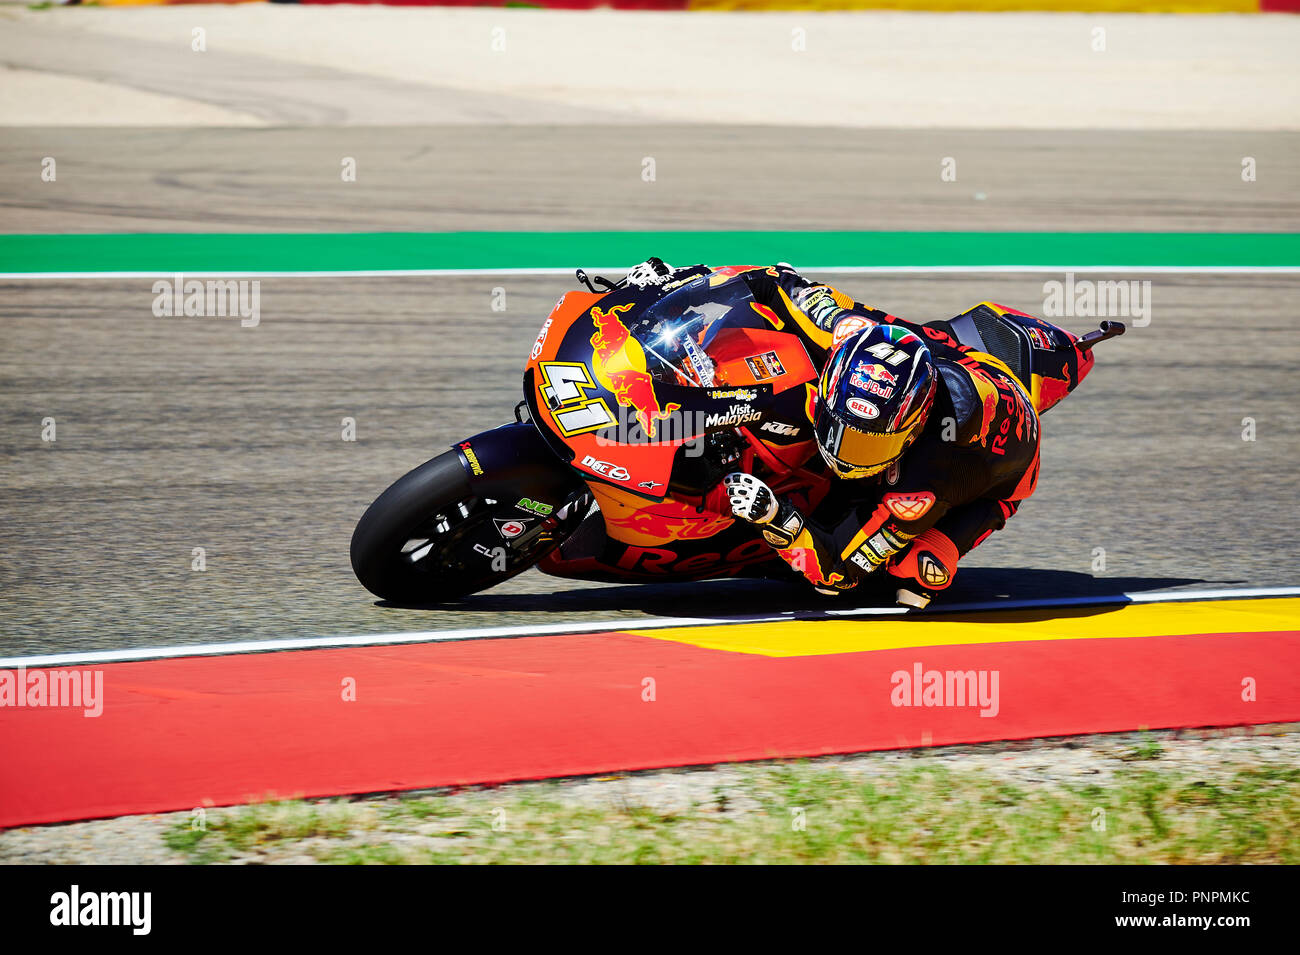 22nd September 2018, Ciudad del Motor de Aragon, Alcaniz, Spain; Motorcycling MotoGP of Aragon, Qualification; Brad Binder of the Red Bull KTM Ajo Moto2 Team rounds the bend during the qualifying Stock Photo